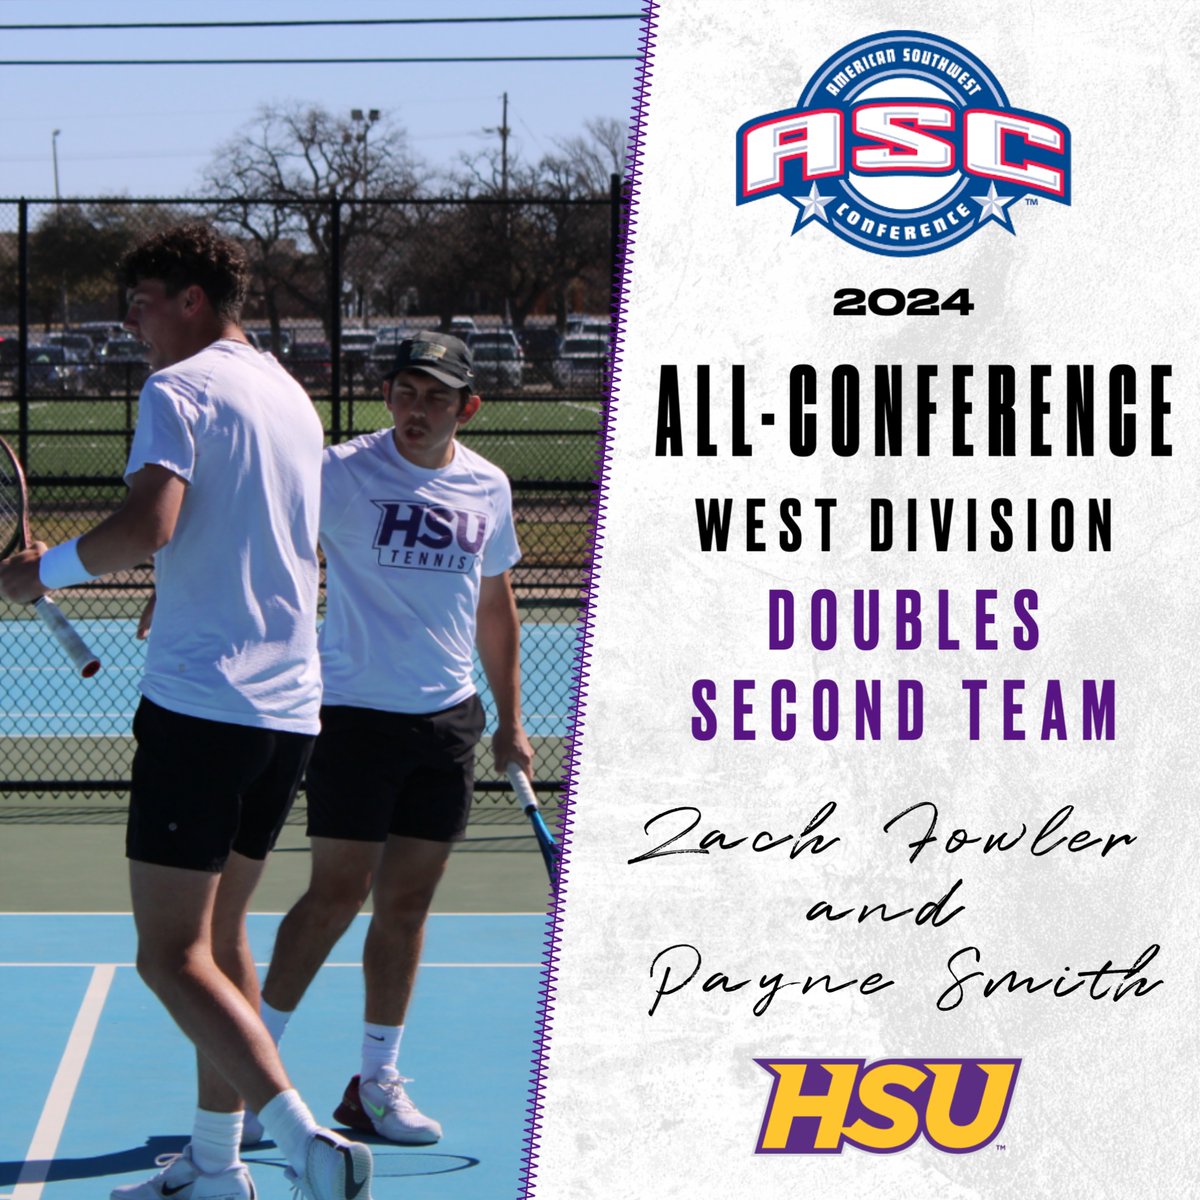 Congrats to Zach Fowler and Payne Smith for being named to the ASC West Doubles Second Team! 🤠